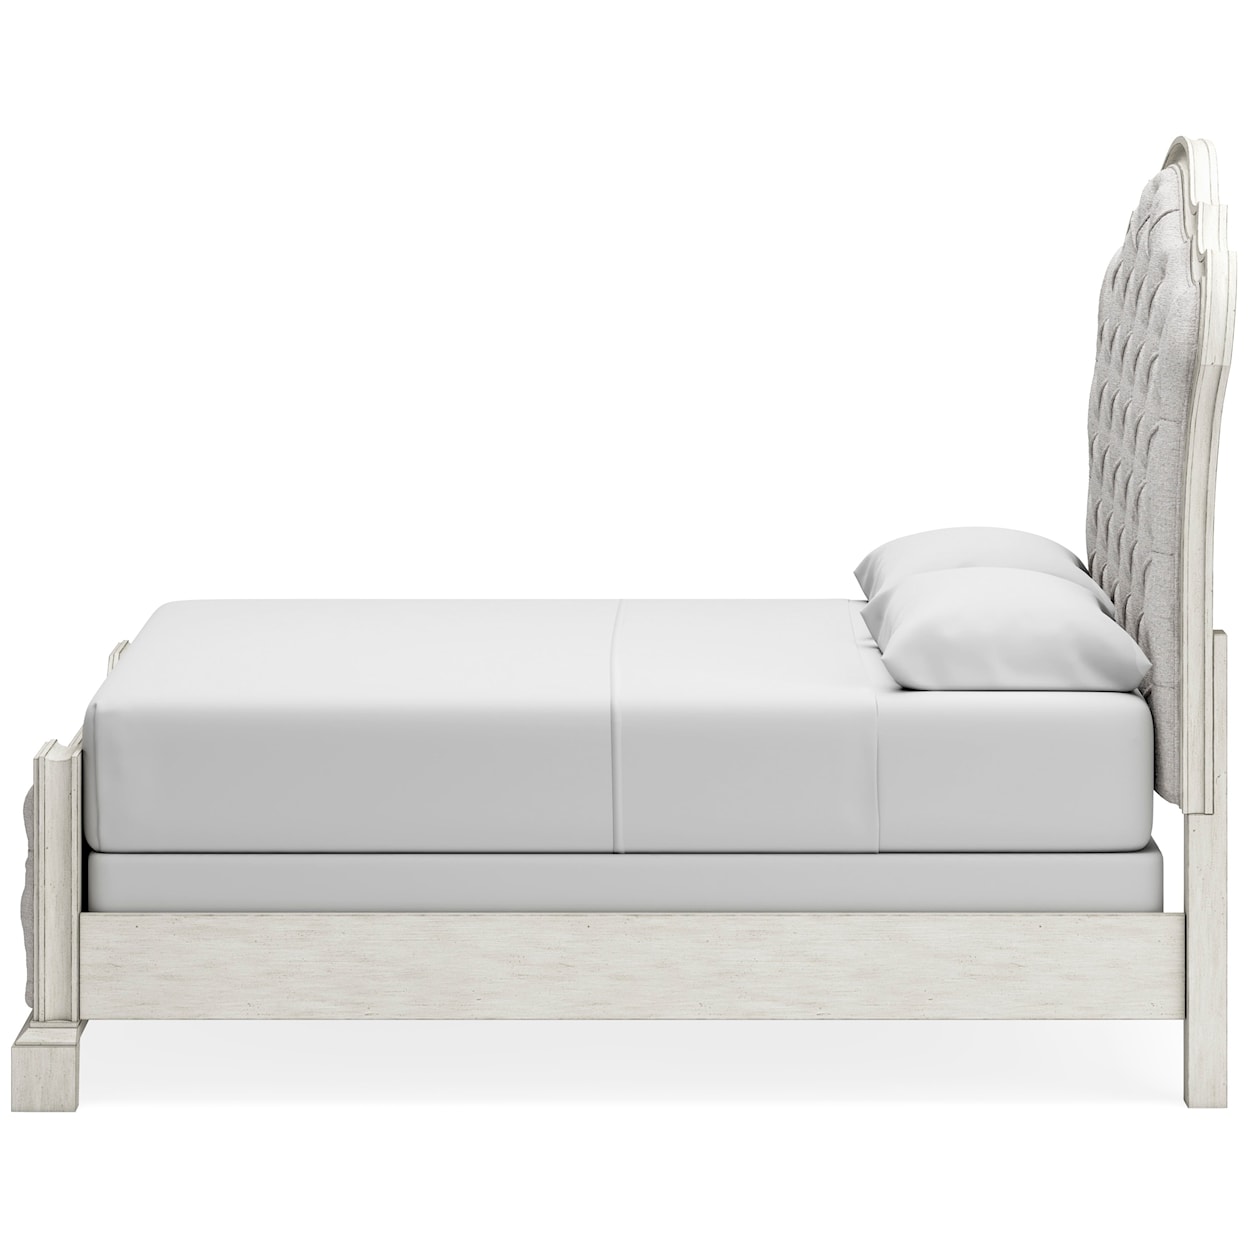 Signature Design by Ashley Furniture Arlendyne Queen Bed